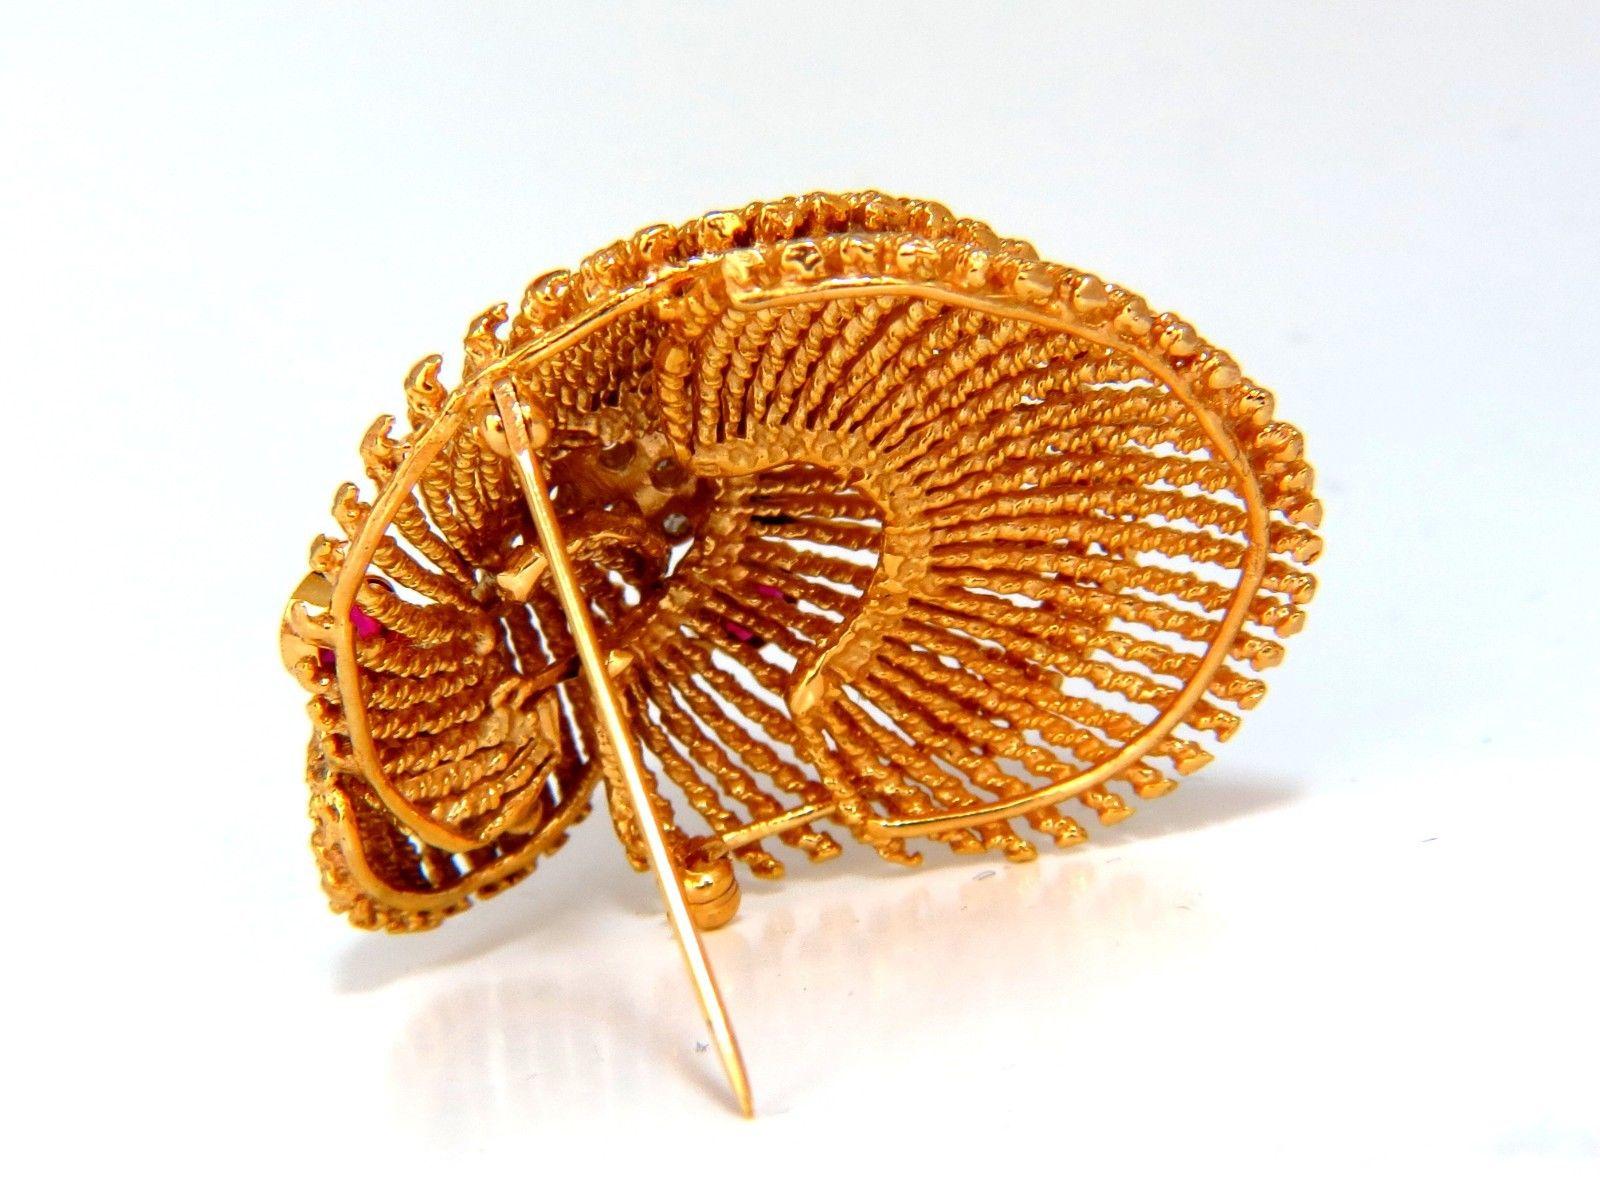 14 Karat Vintage 1.25 Carat Diamond 3D Mollusk Sea Shell Brooch Pin Barley Twist In Excellent Condition For Sale In New York, NY